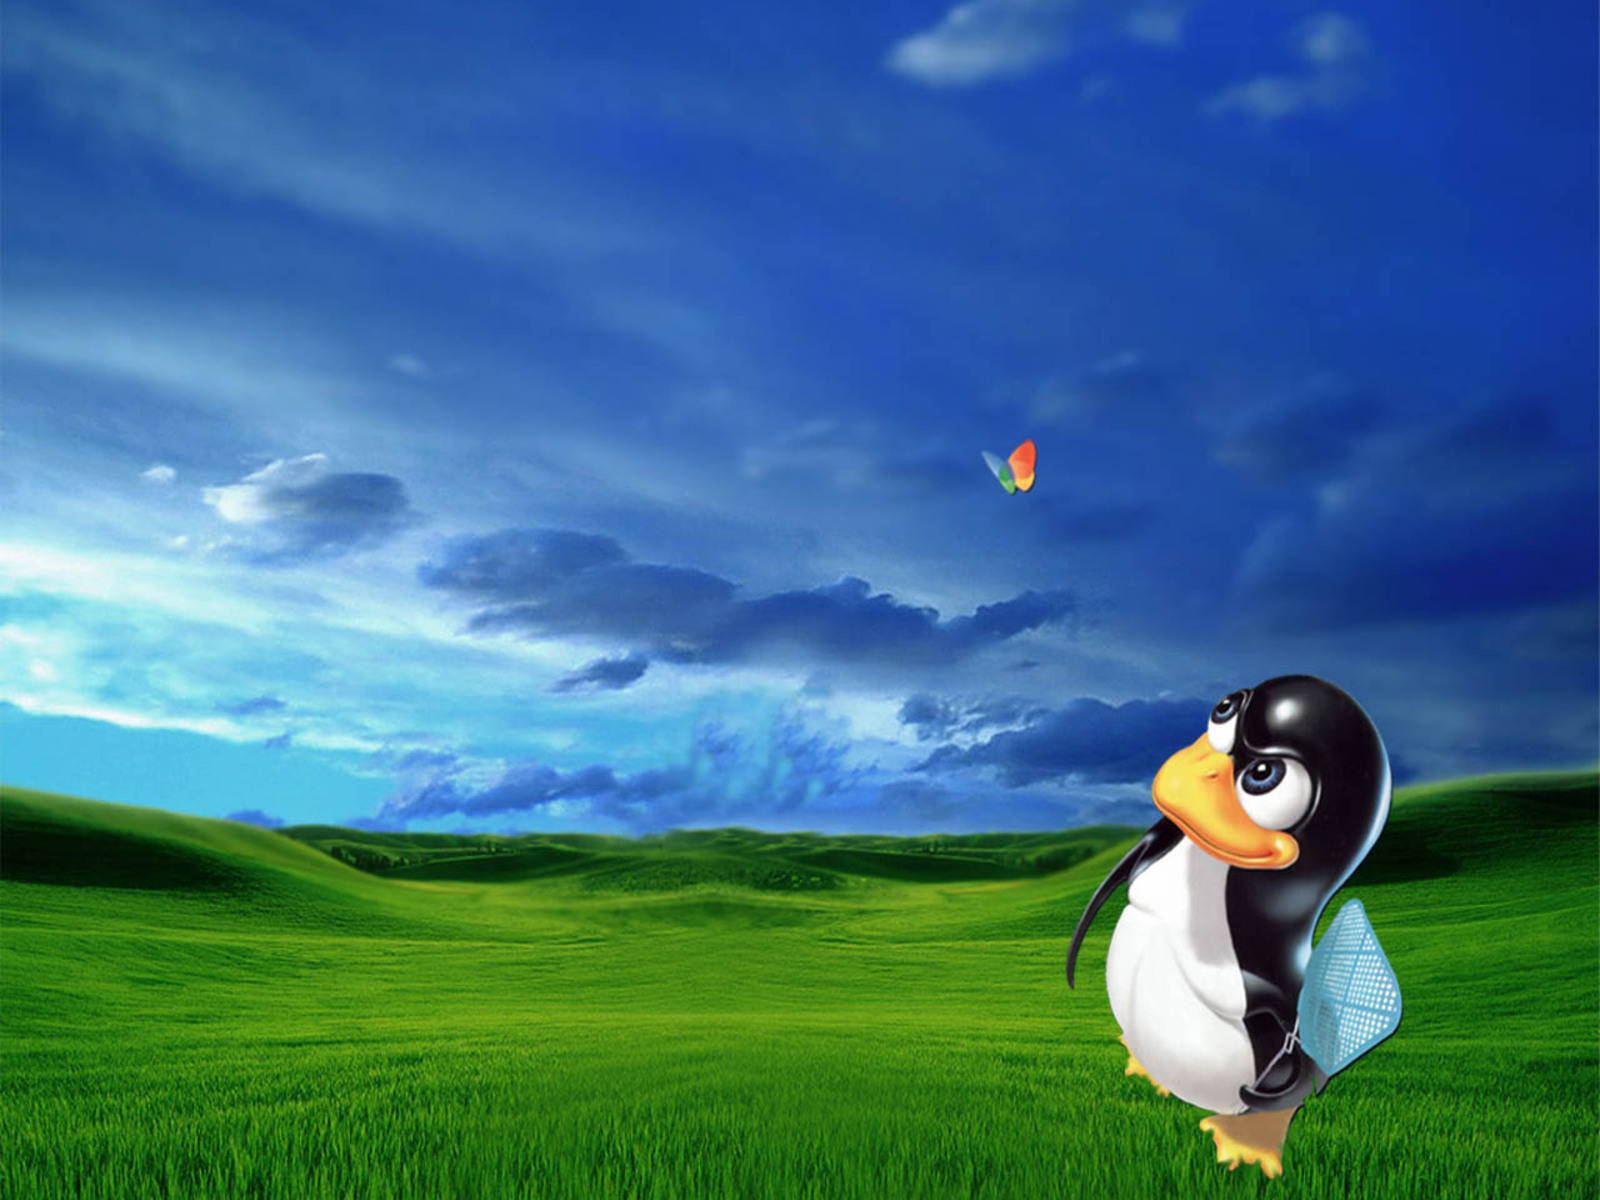 My Linux wallpapers Feel free to download and use for your own